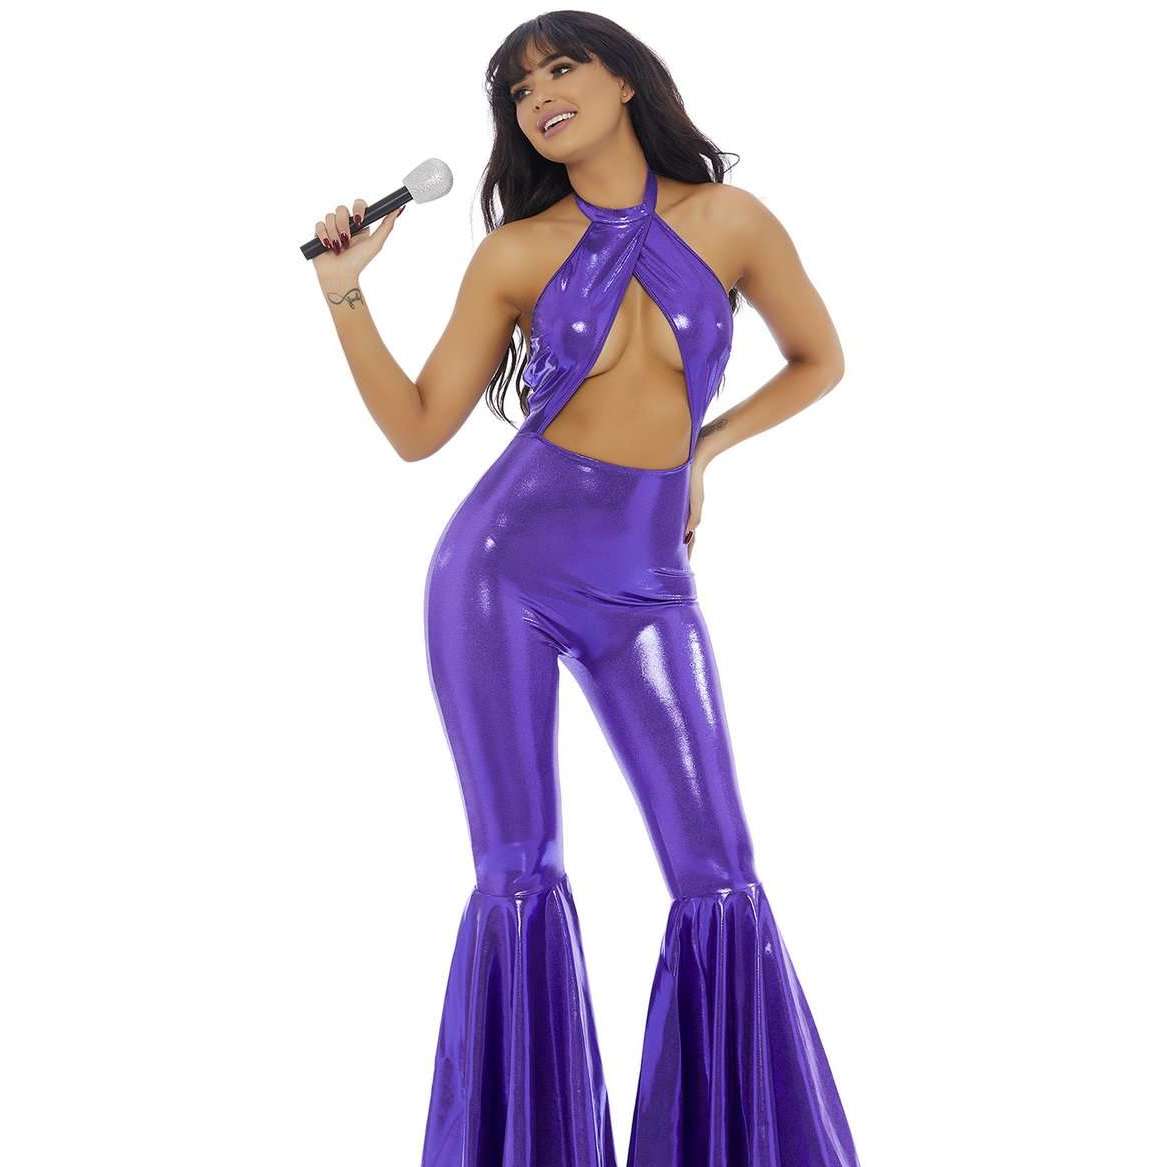 La Flor Queen of Tejano Music Sexy Adult Costume